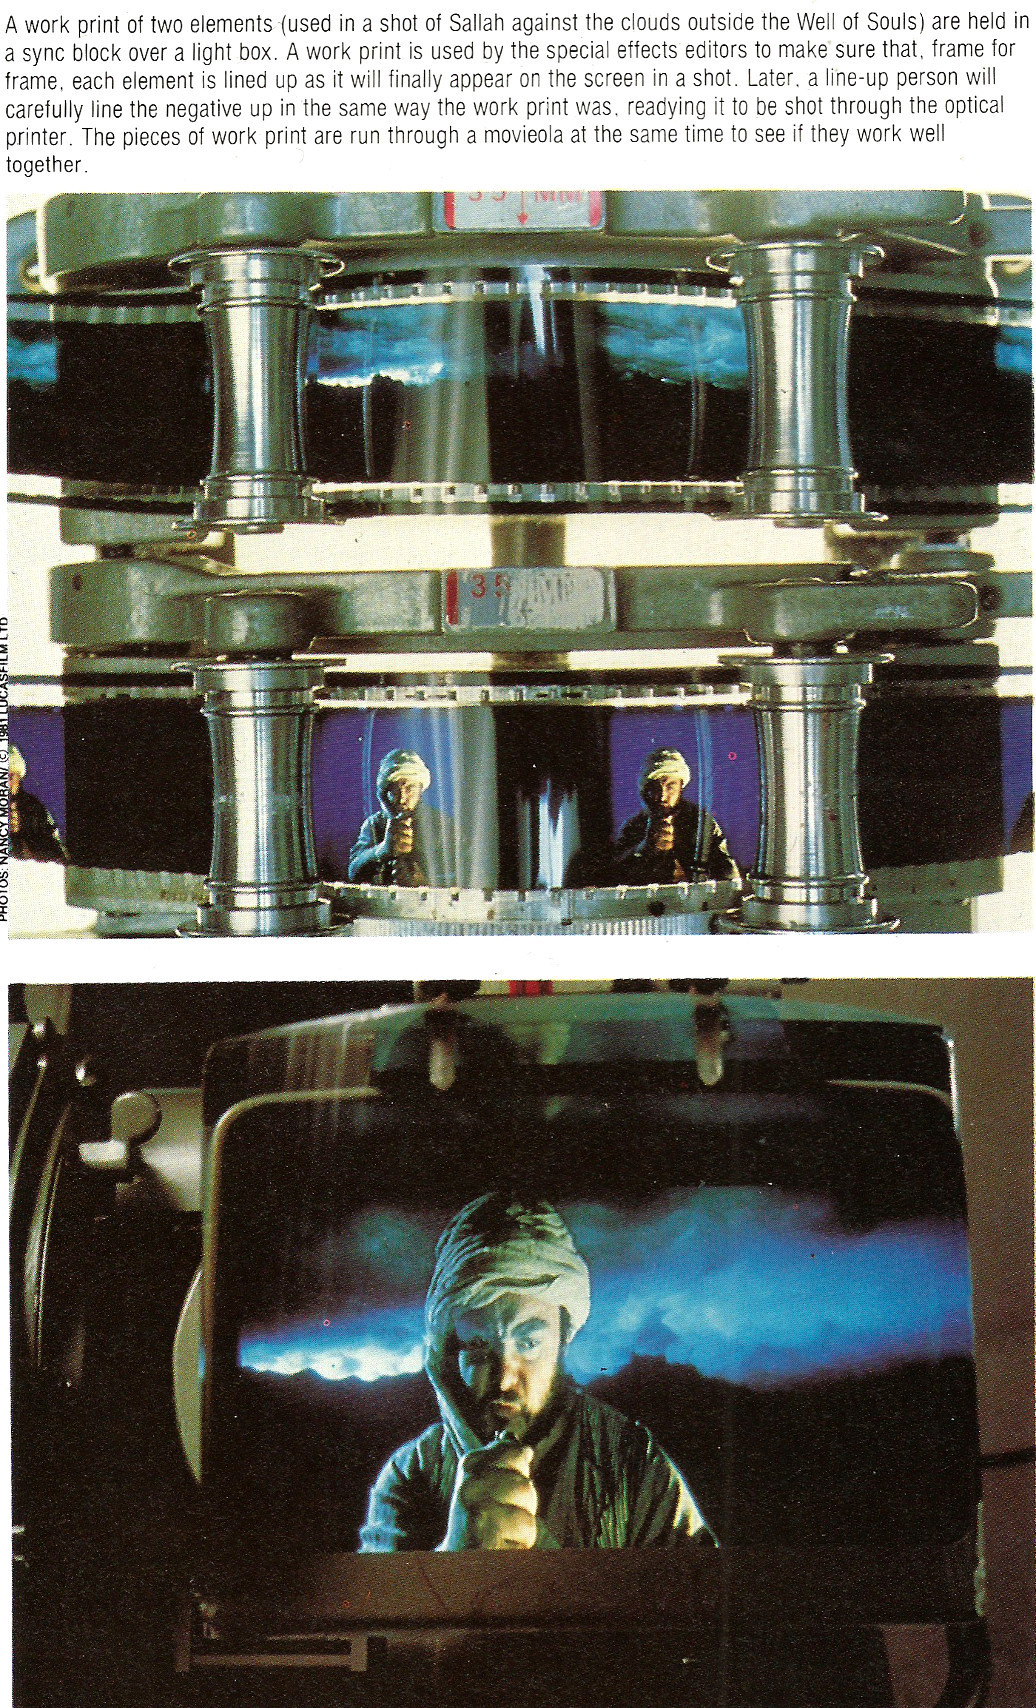 Raiders Of The Lost Ark SFX shot, from Special Effects Vol. 4: A Starlog Photo Guidebook, by